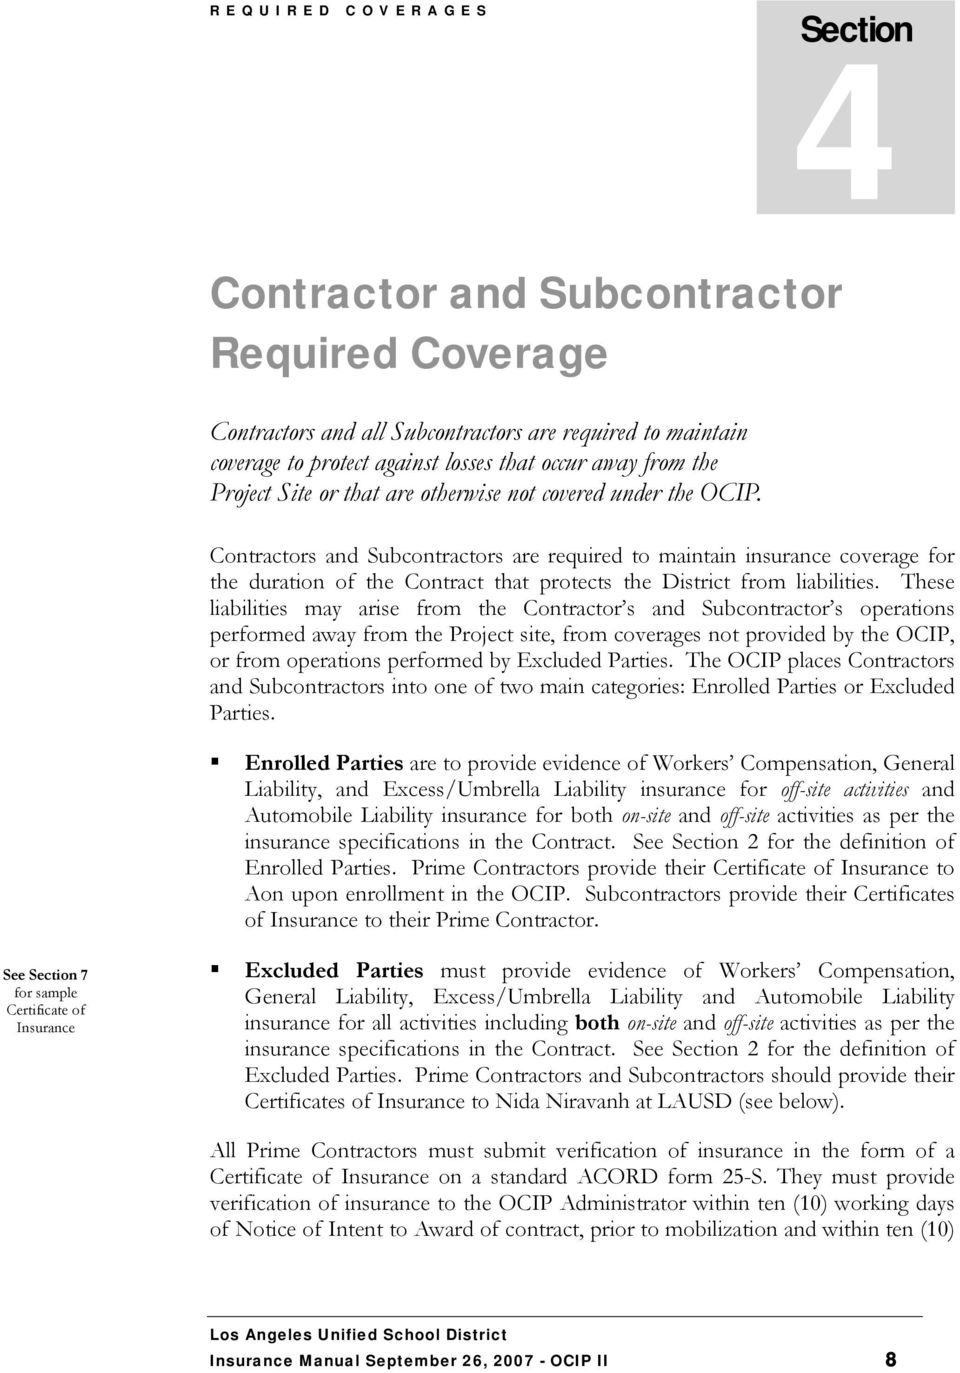 Contractors and Subcontractors are required to maintain insurance coverage for the duration of the Contract that protects the District from liabilities.